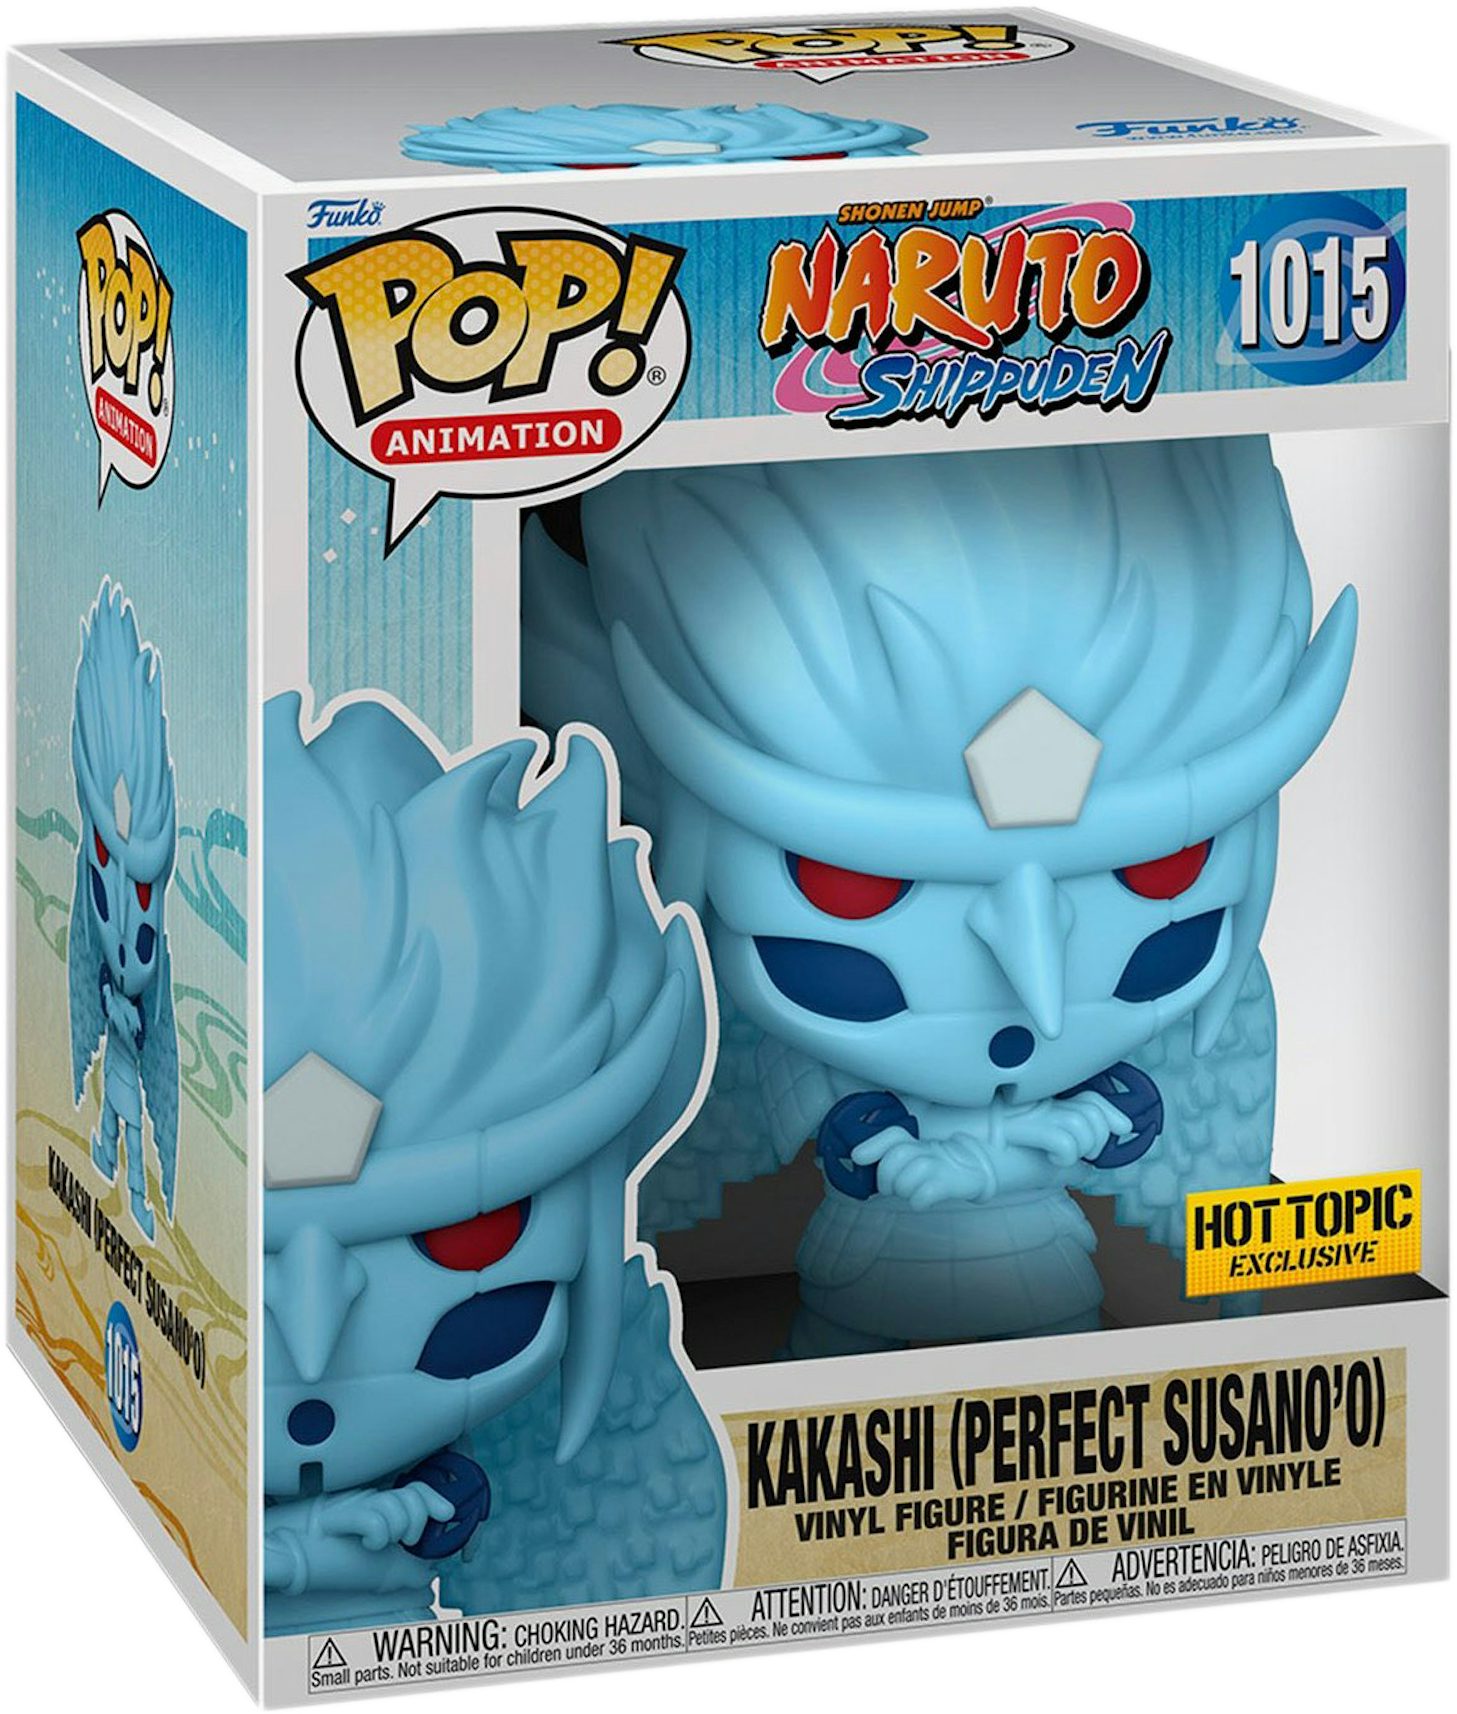 https://images.stockx.com/images/funko-pop-animation-naruto-shippuden-kakashi-perfect-susanoo-hot-topic-exclusive-figure-1015-updated.jpg?fit=fill&bg=FFFFFF&w=1200&h=857&fm=jpg&auto=compress&dpr=2&trim=color&updated_at=1644374773&q=60